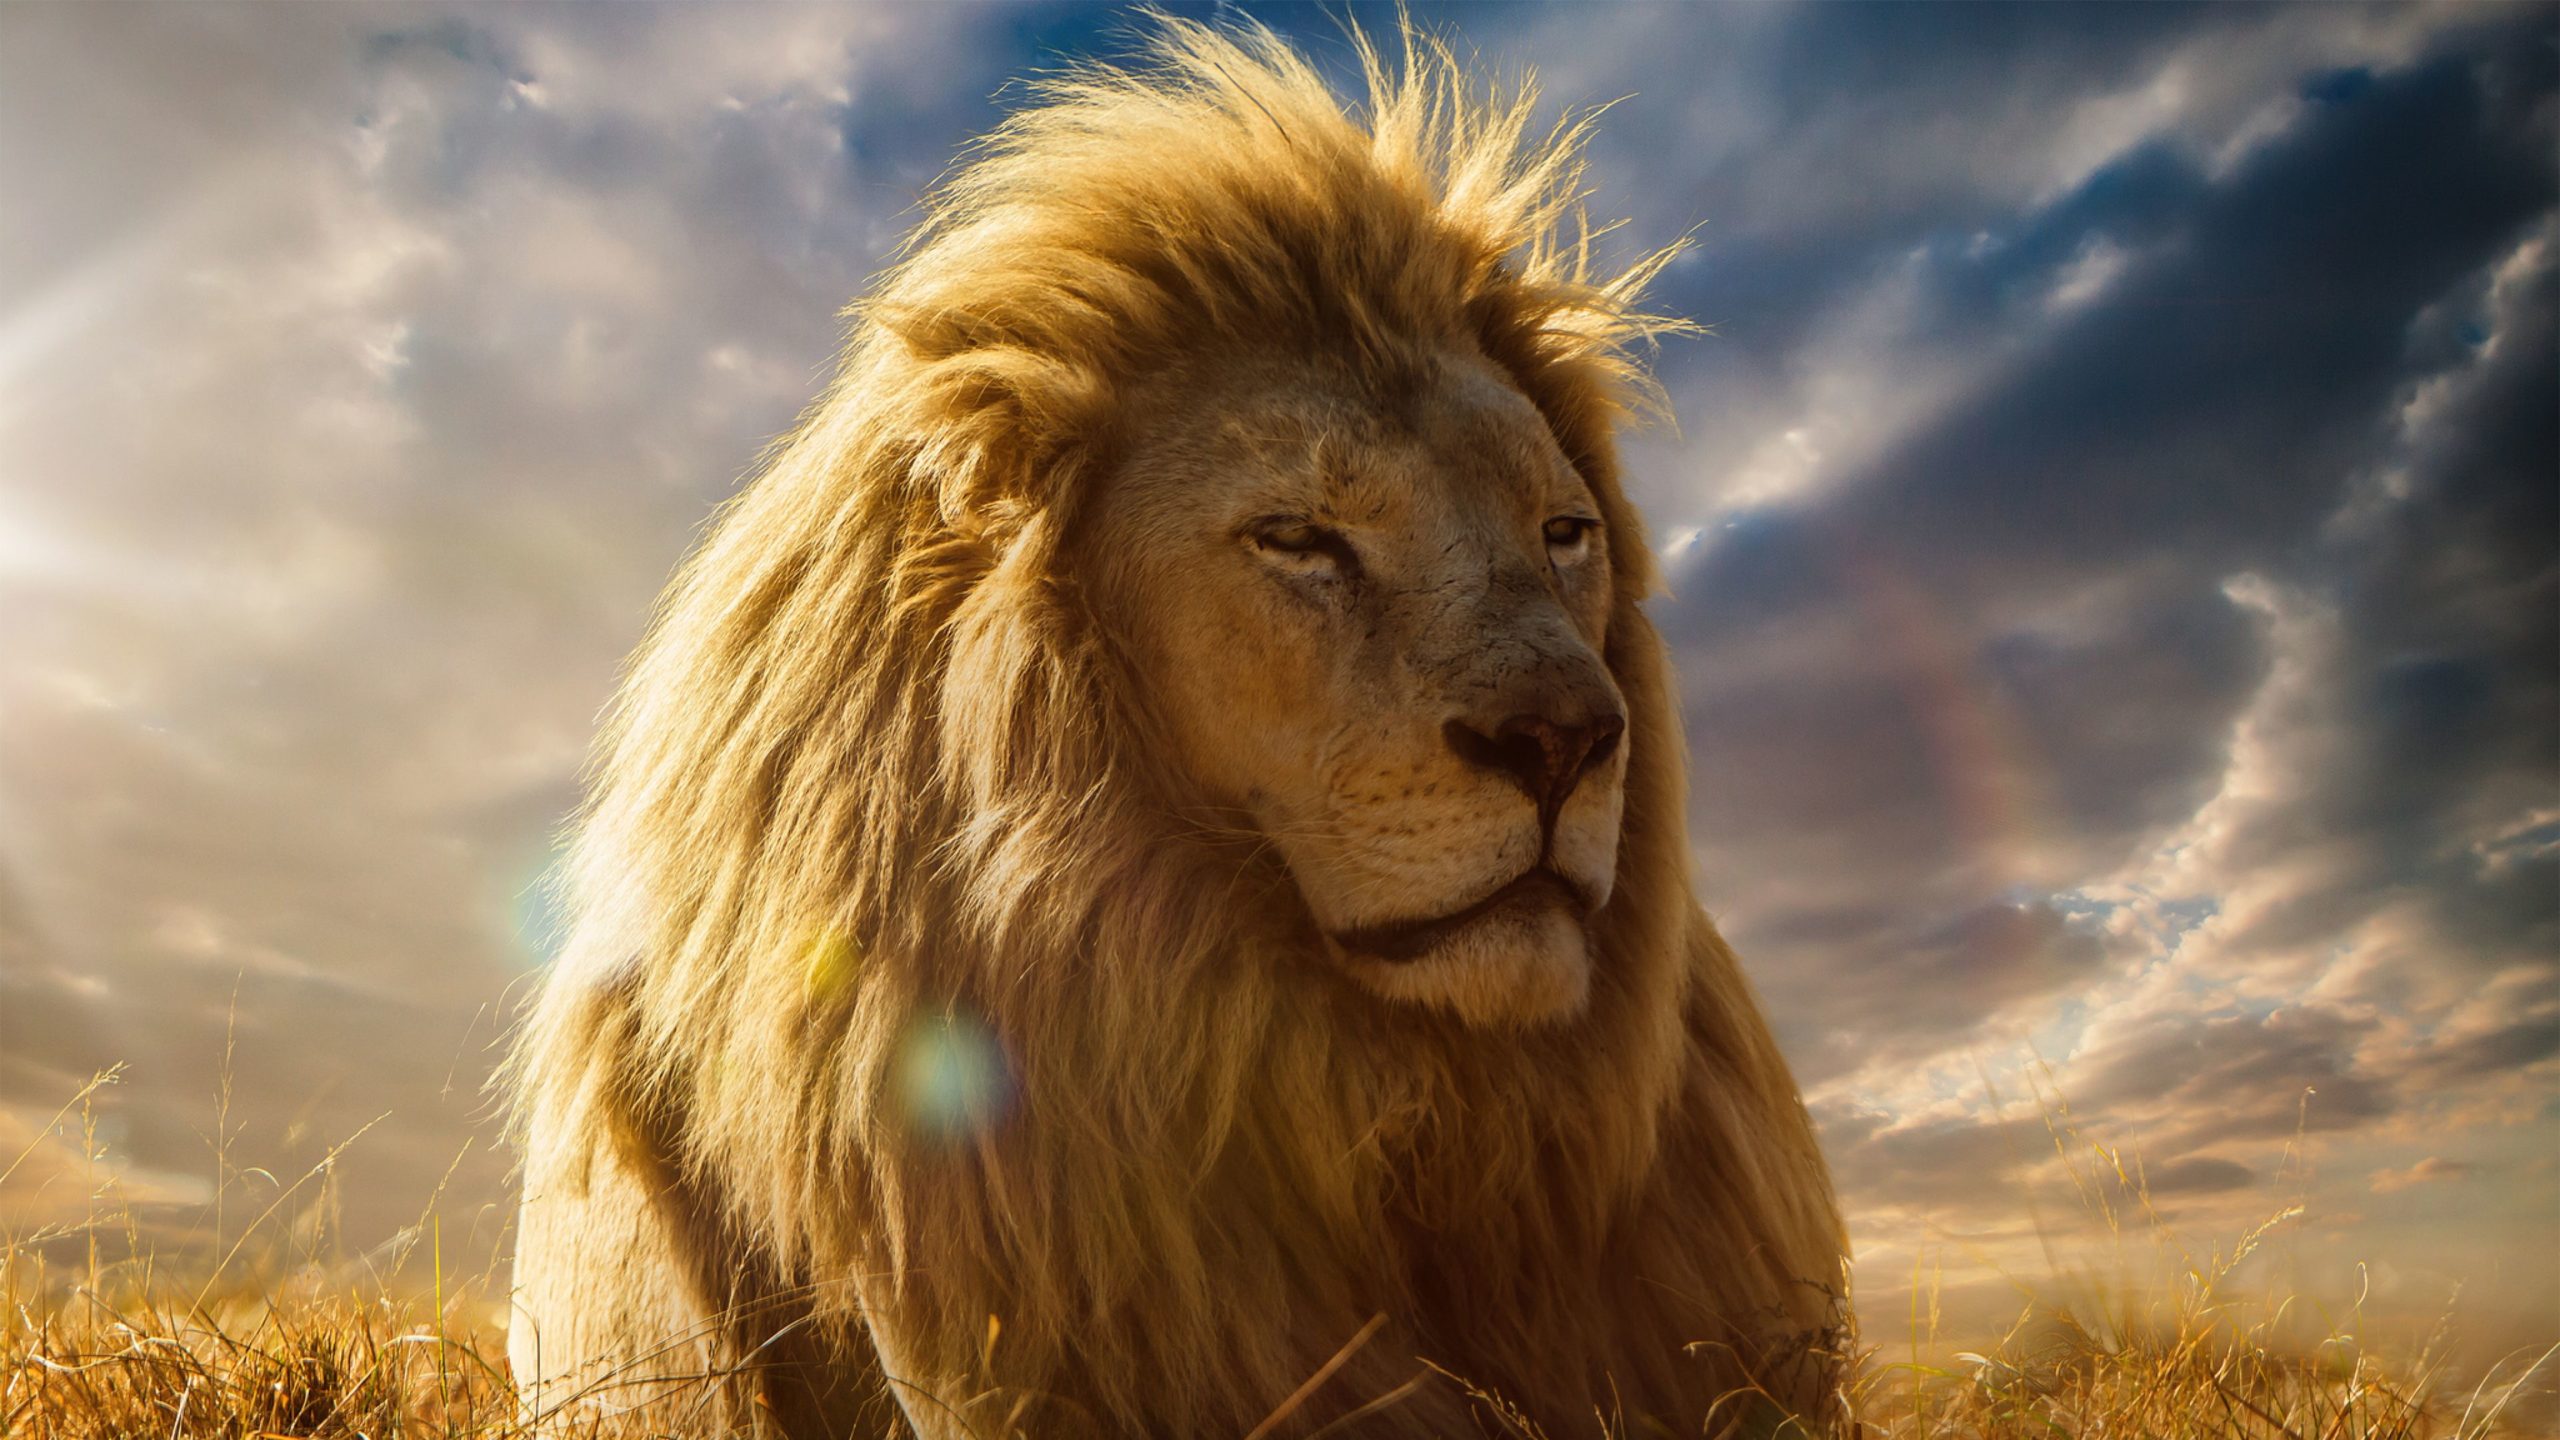 hd lion wallpapers 1080p